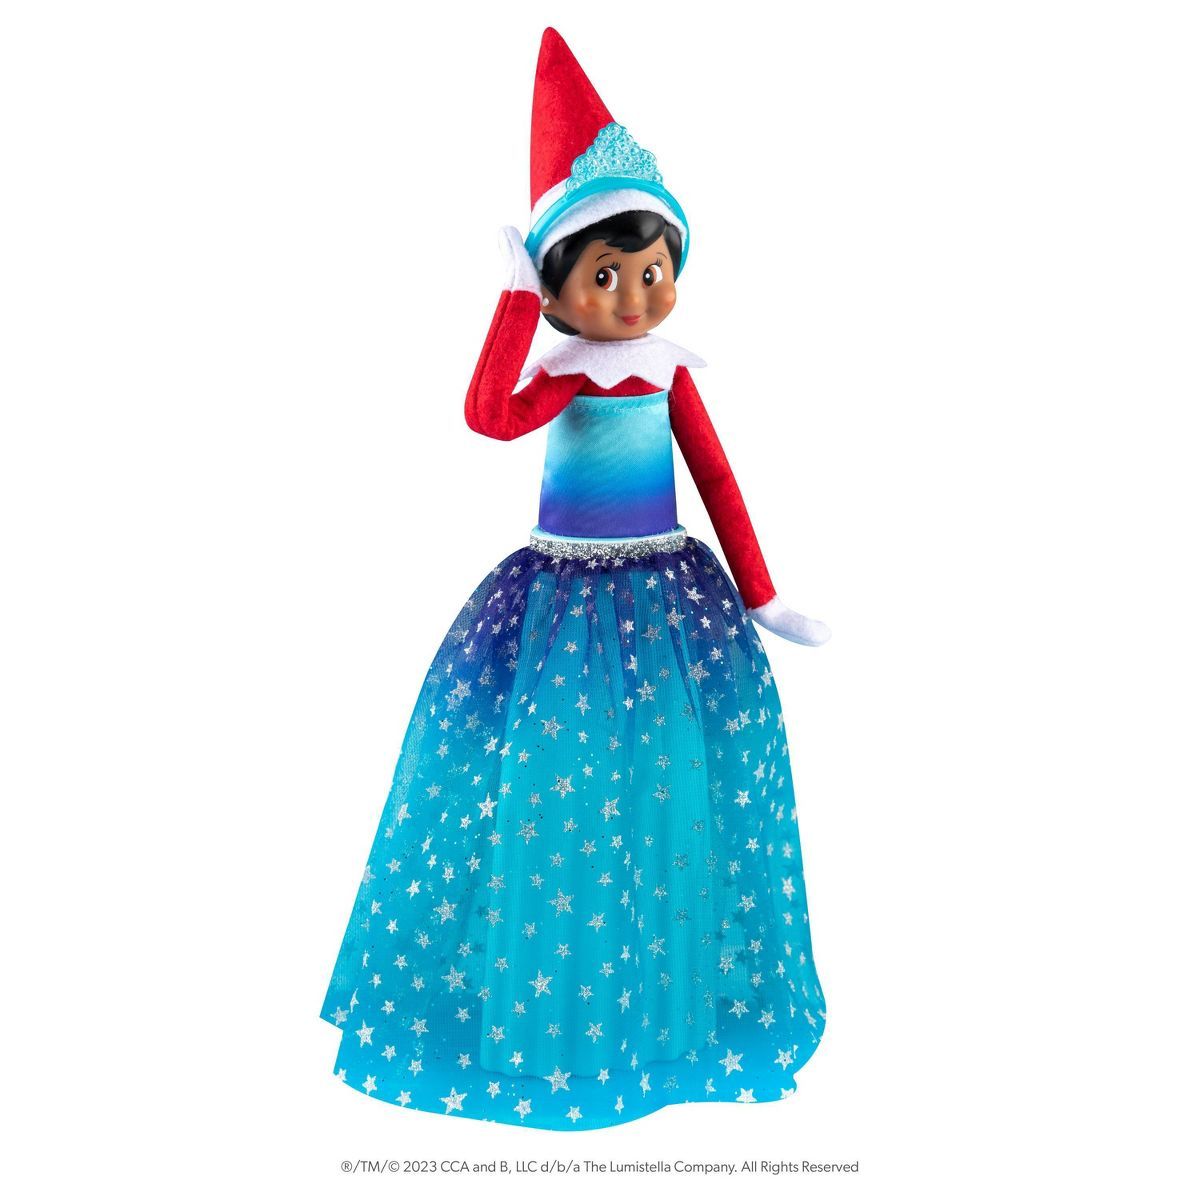 MagiFreez Twinkling Tiara Ball Gown - Target Exclusive Edition | Target